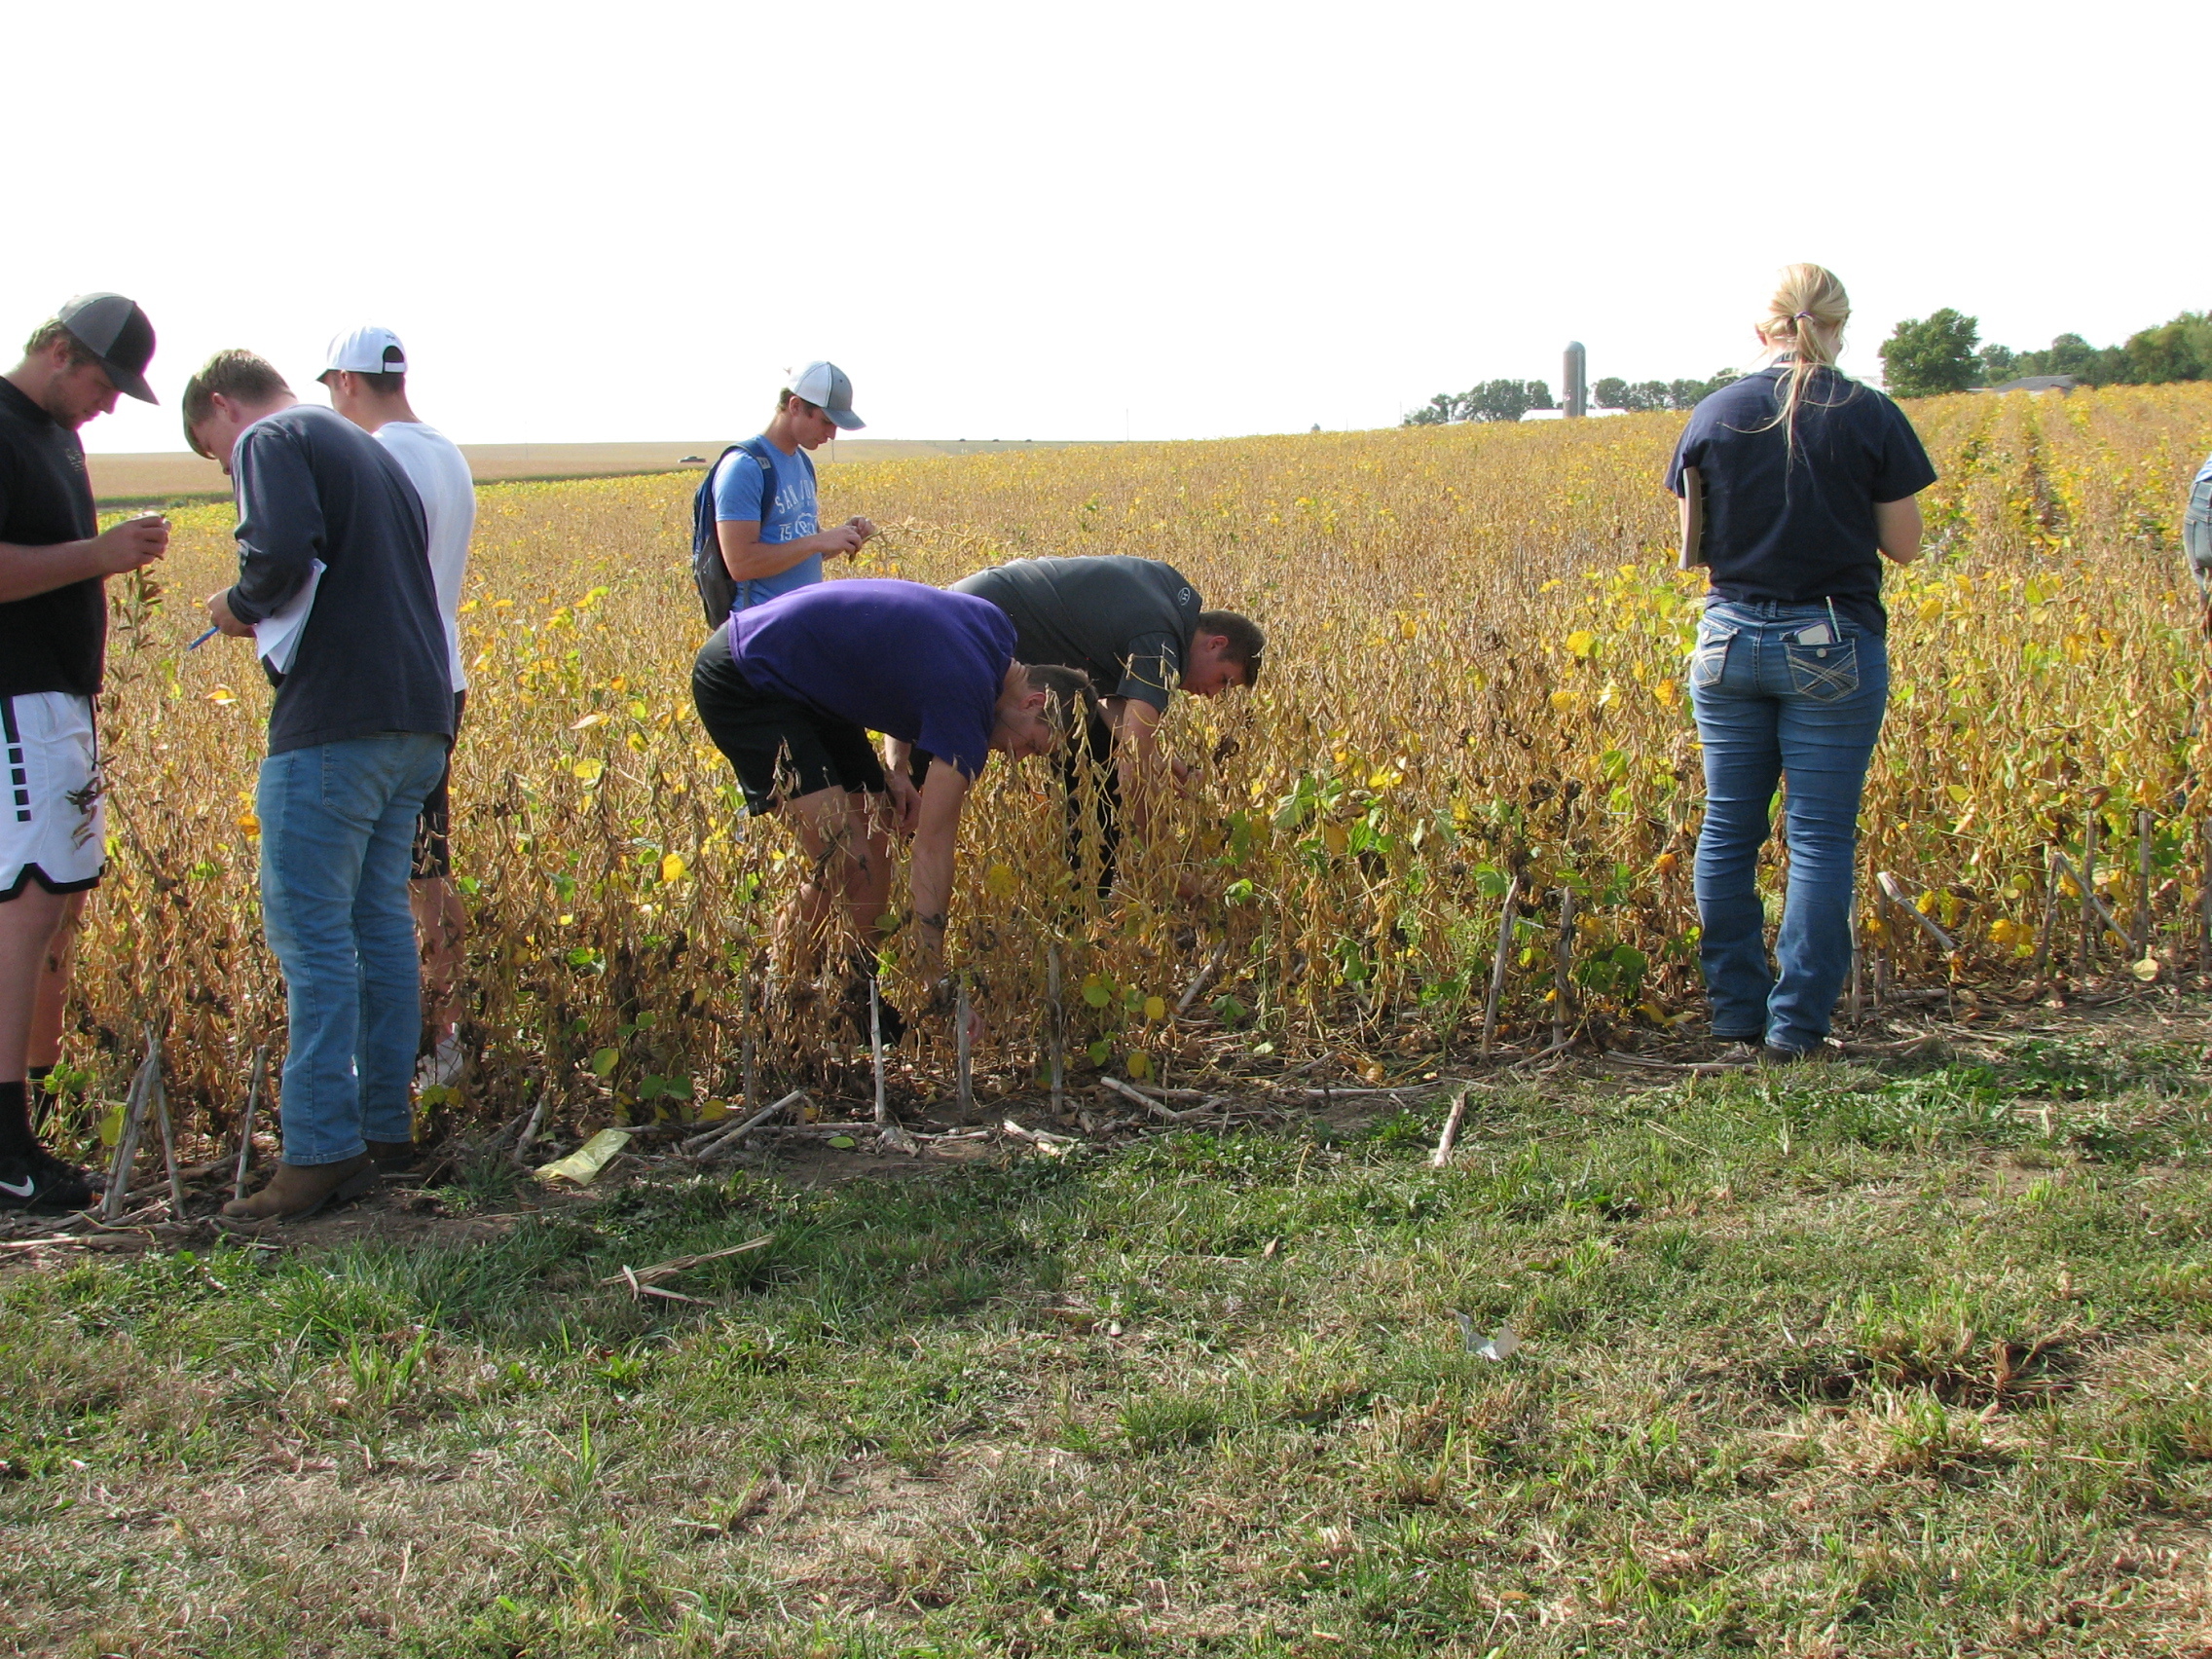 Students analyze soybeans in a field